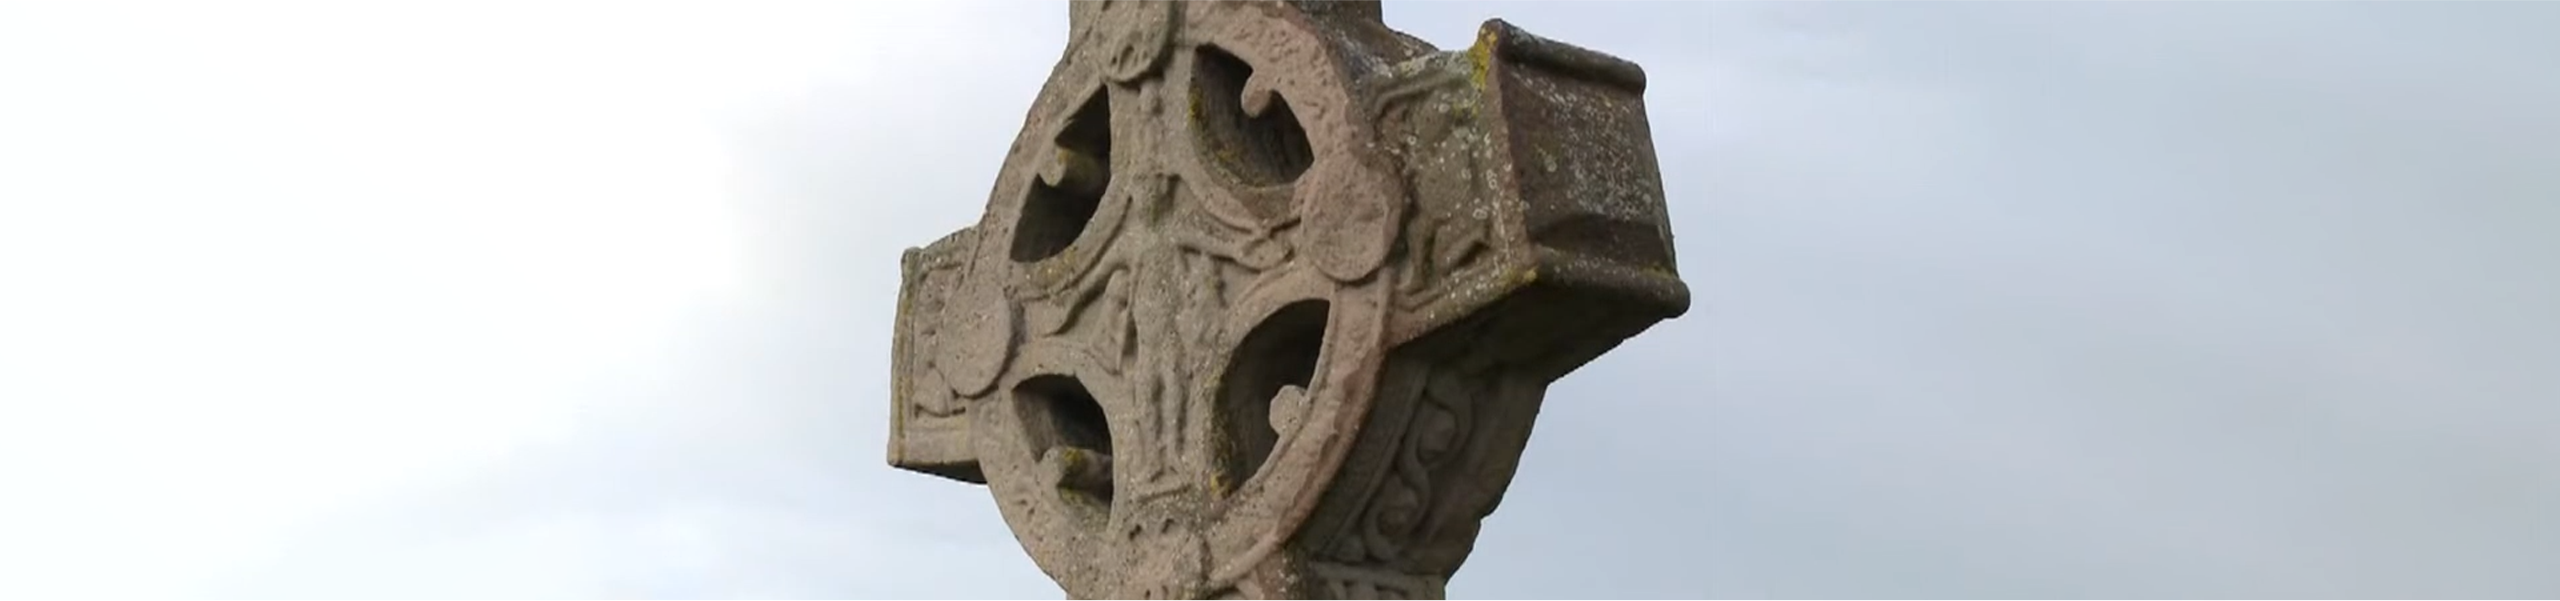 My Journey to Life: On the Trail of Celtic Saints